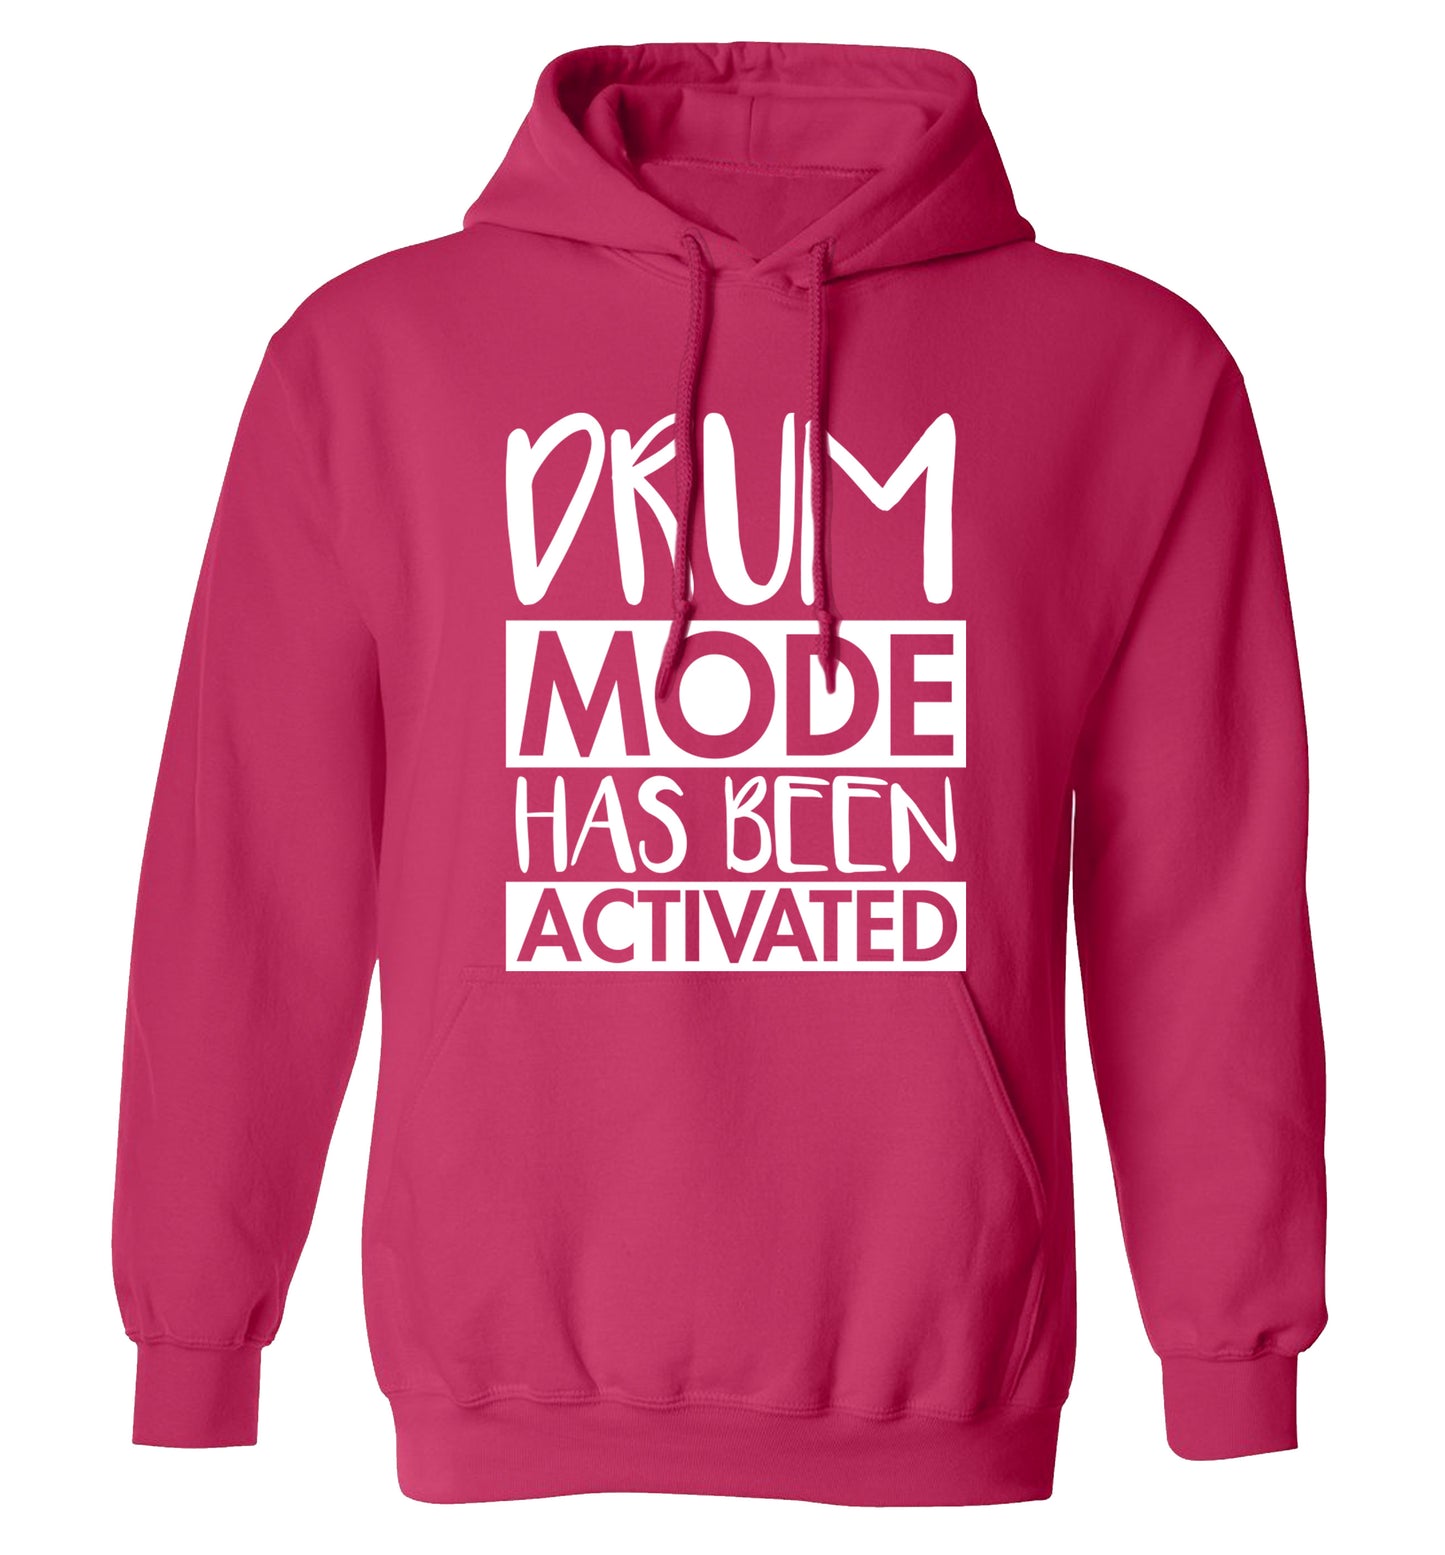 Drum mode activated adults unisexpink hoodie 2XL